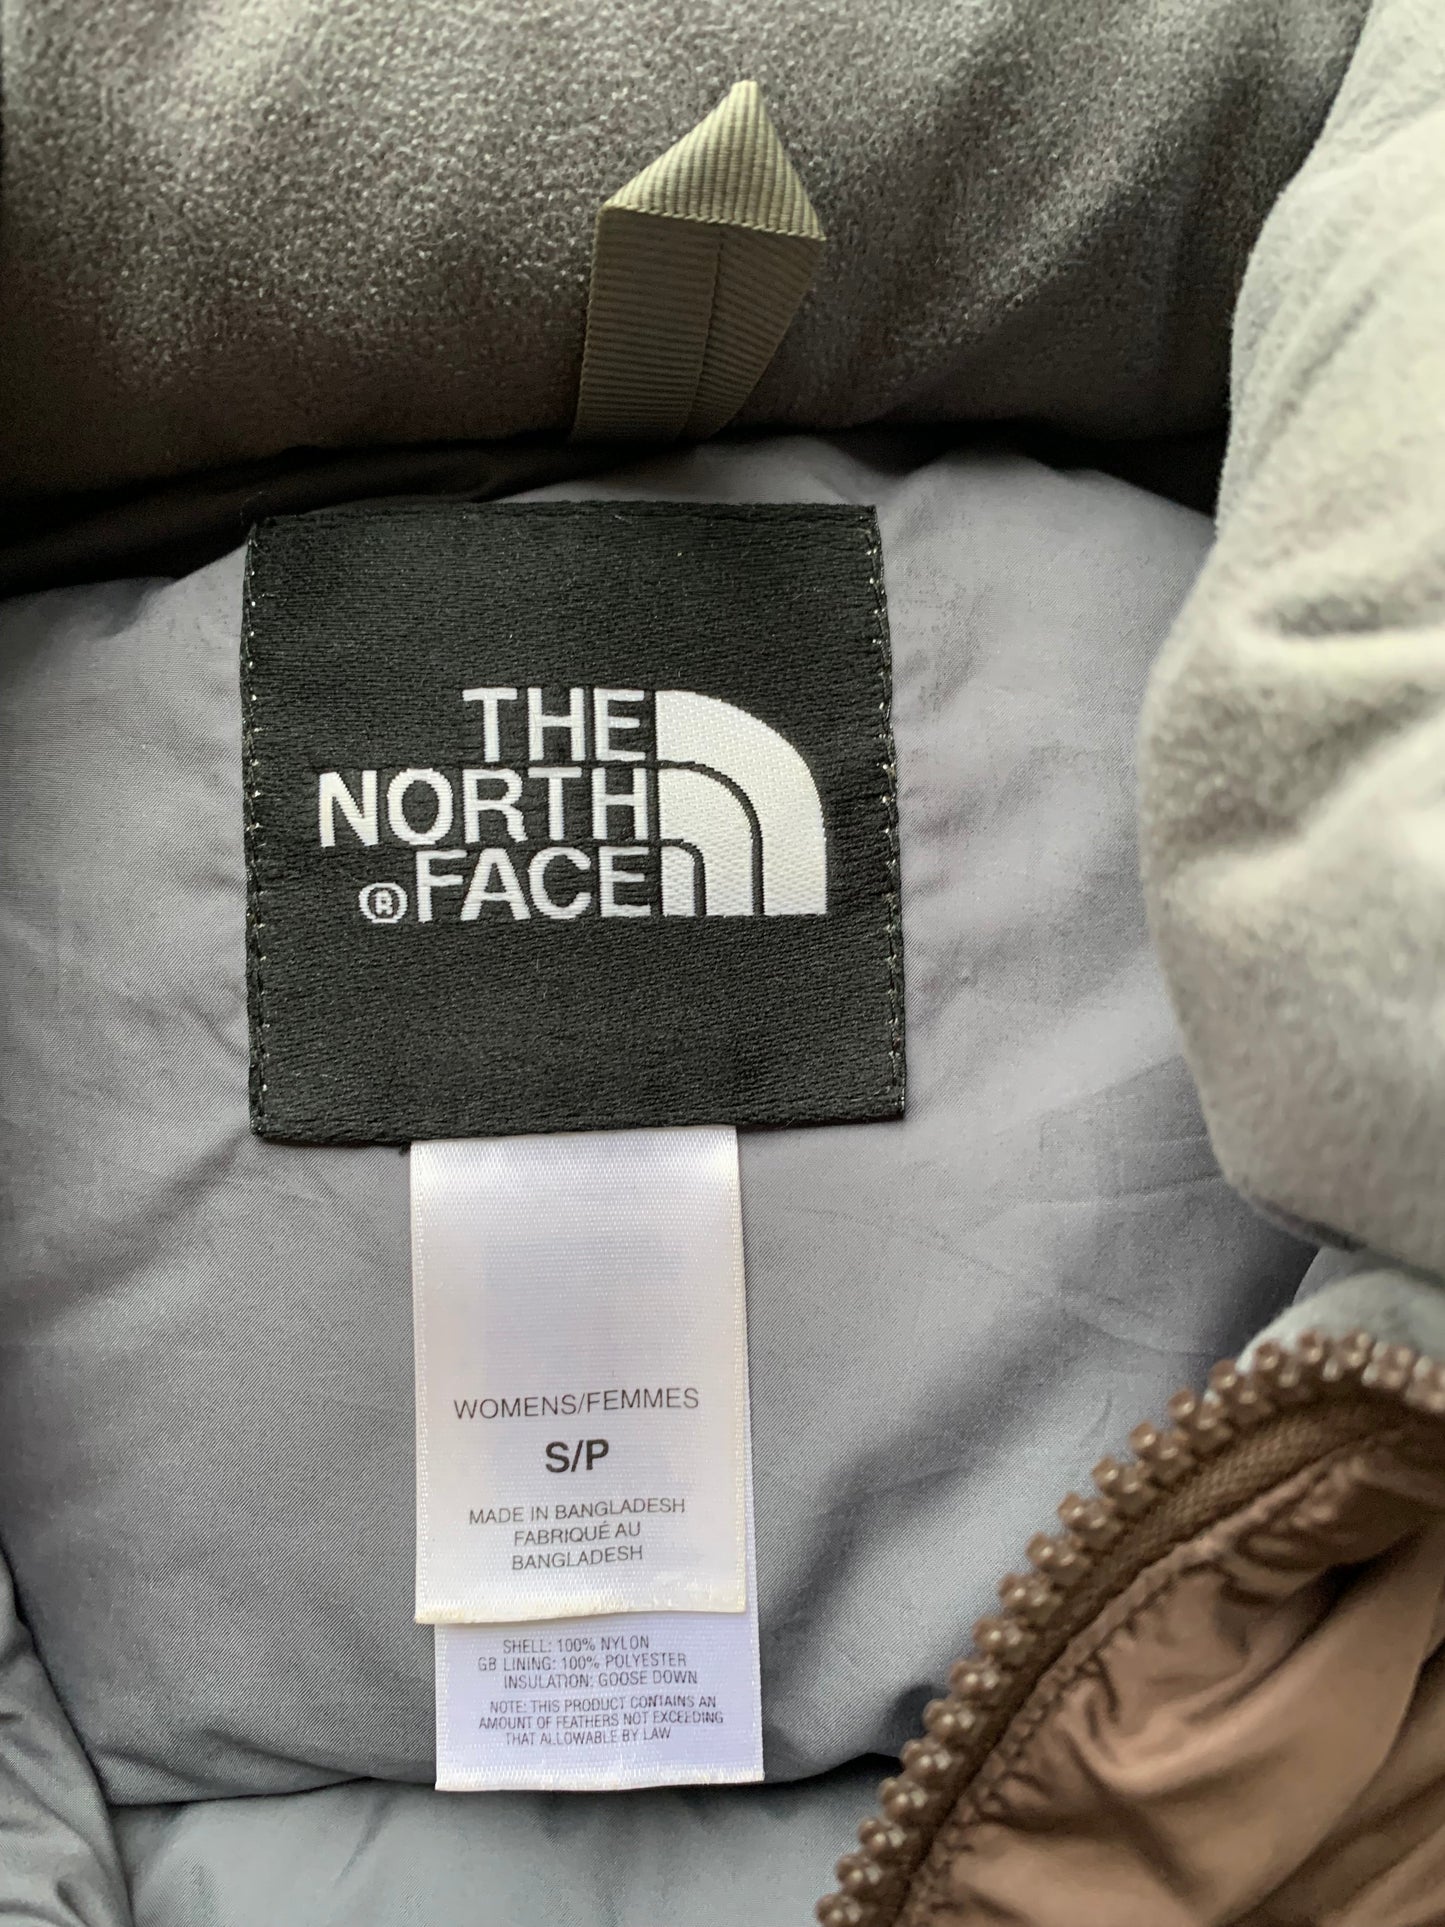 (S) The North Face 700 Brown Nuptse